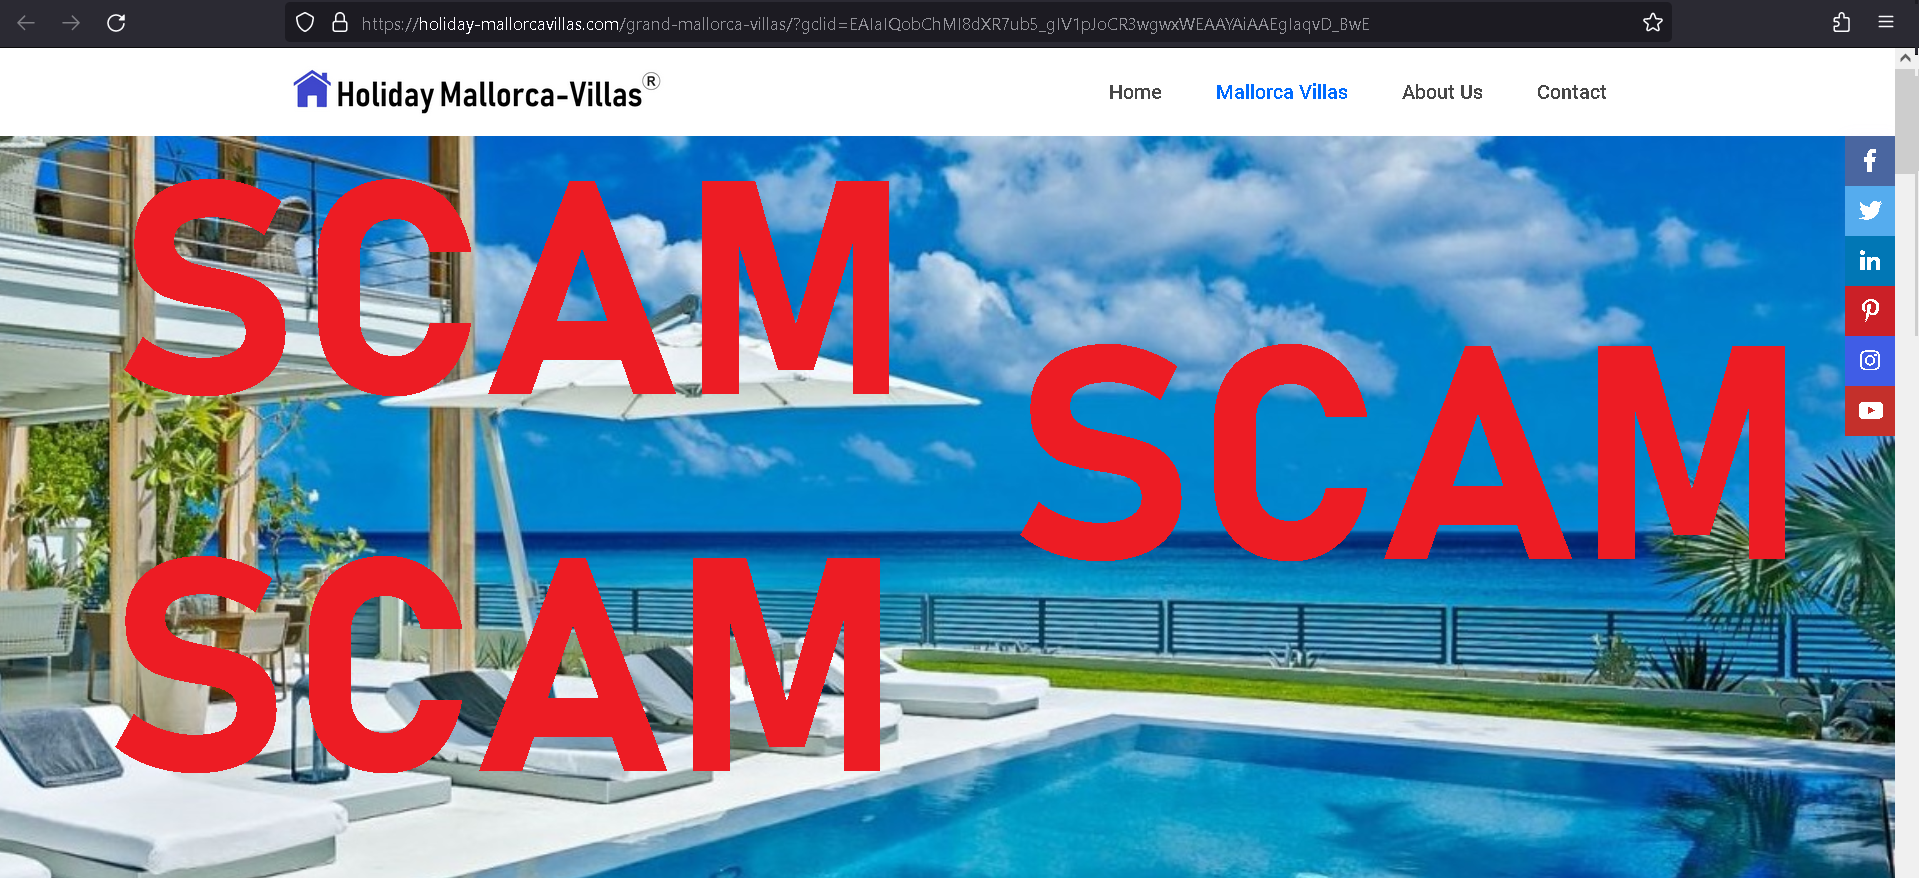 You are currently viewing Fraudulent website: holiday-mallorcavillas.com SCAM SCAM